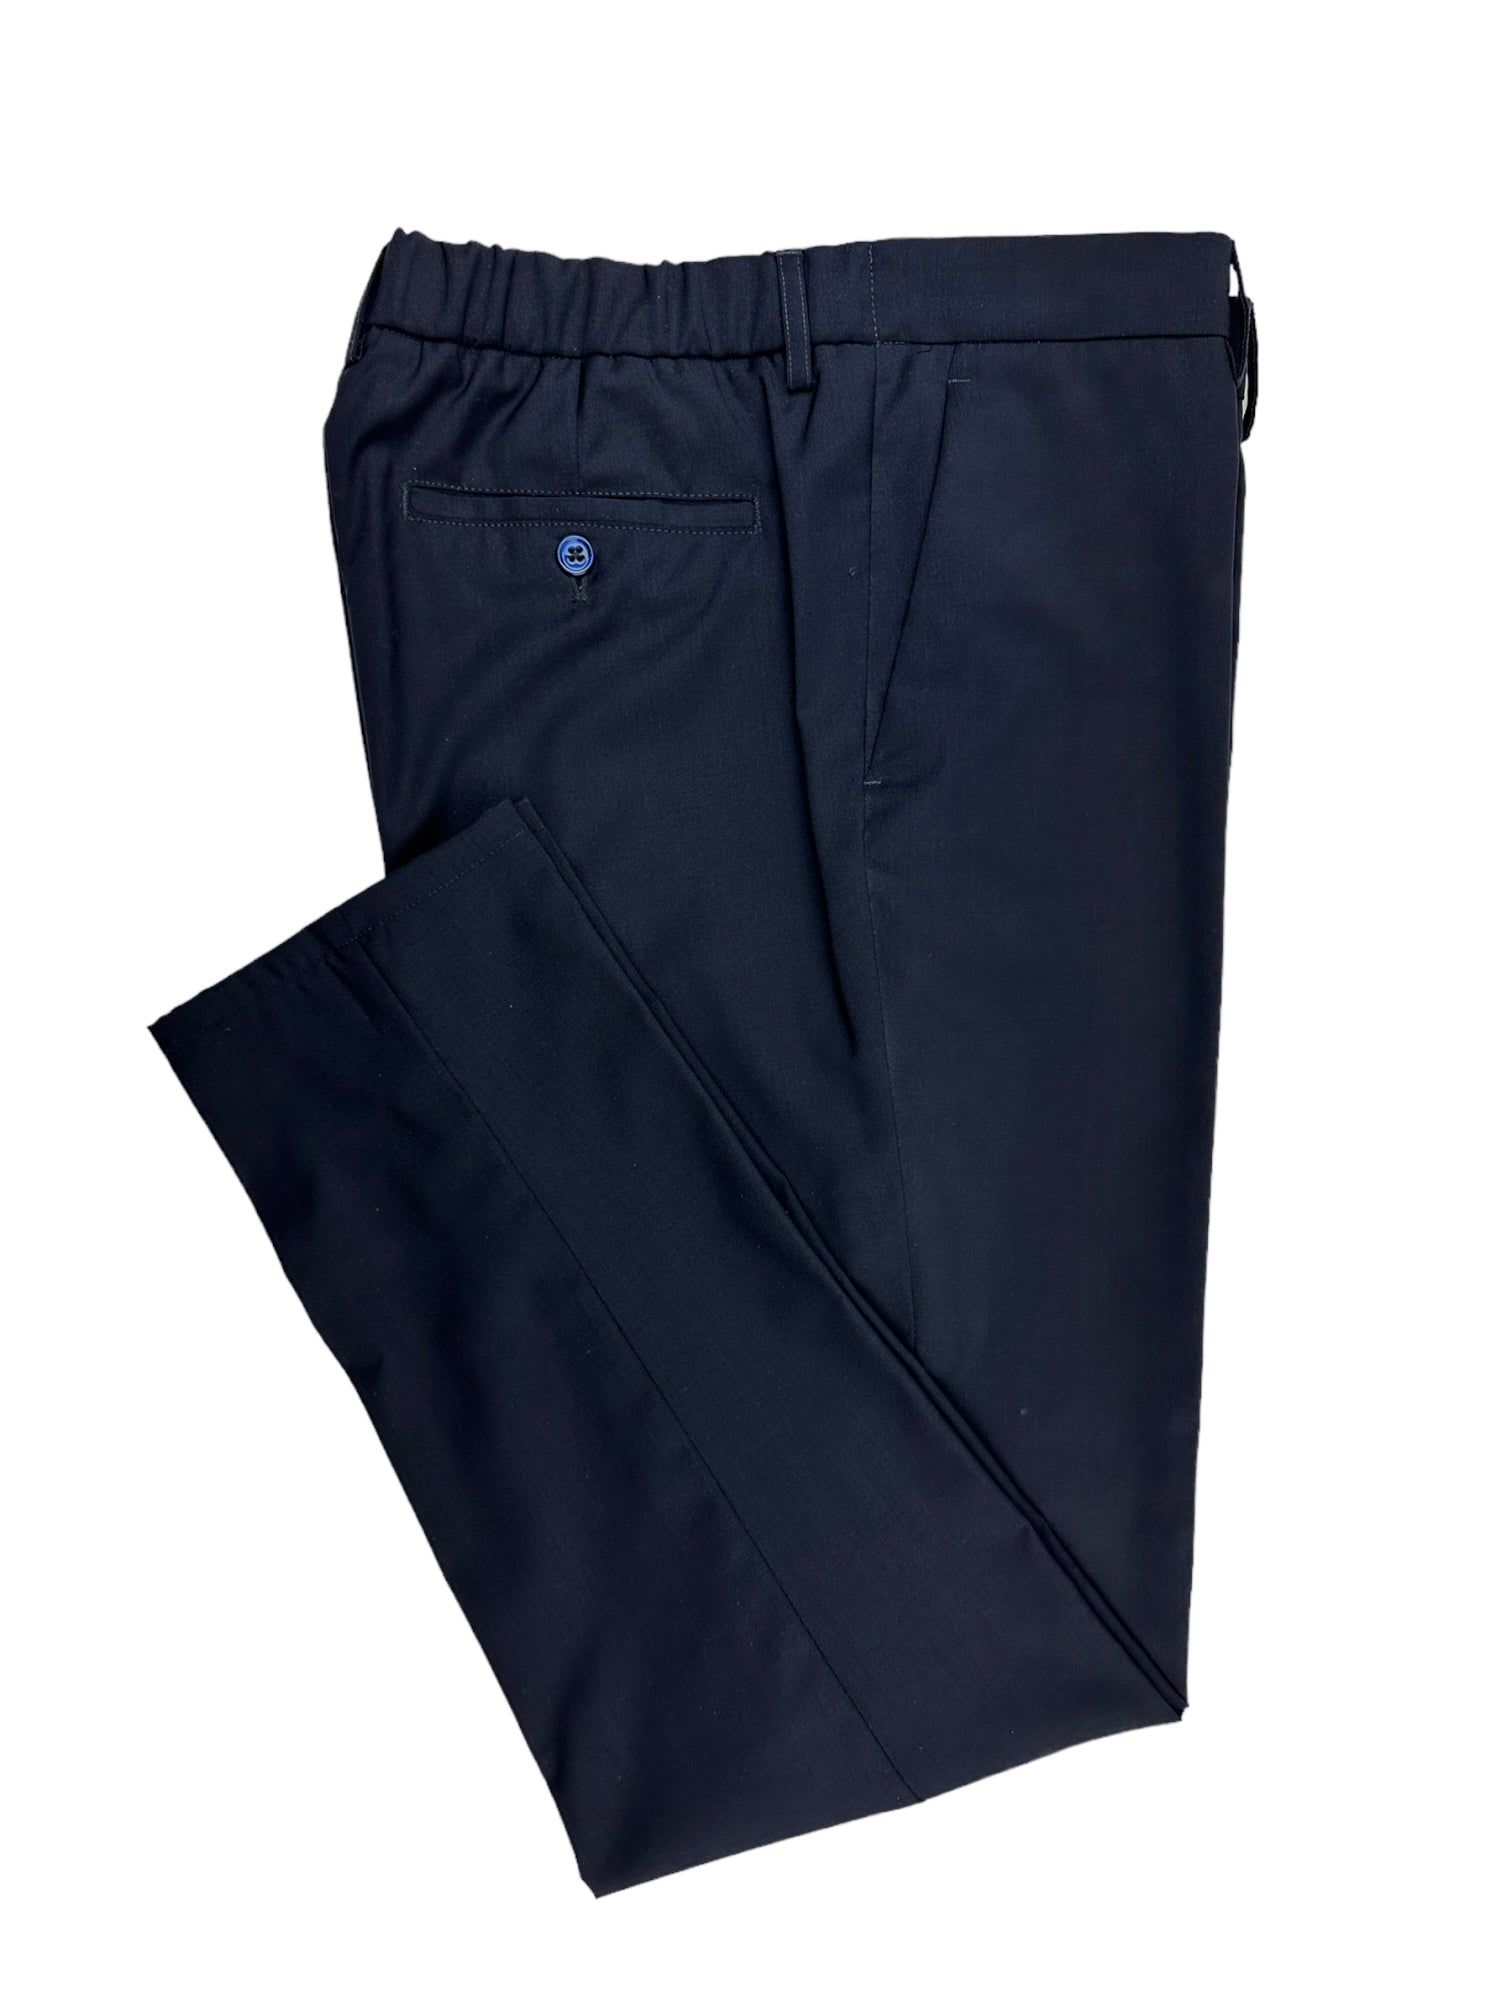 Perscarolo Navy Trousers